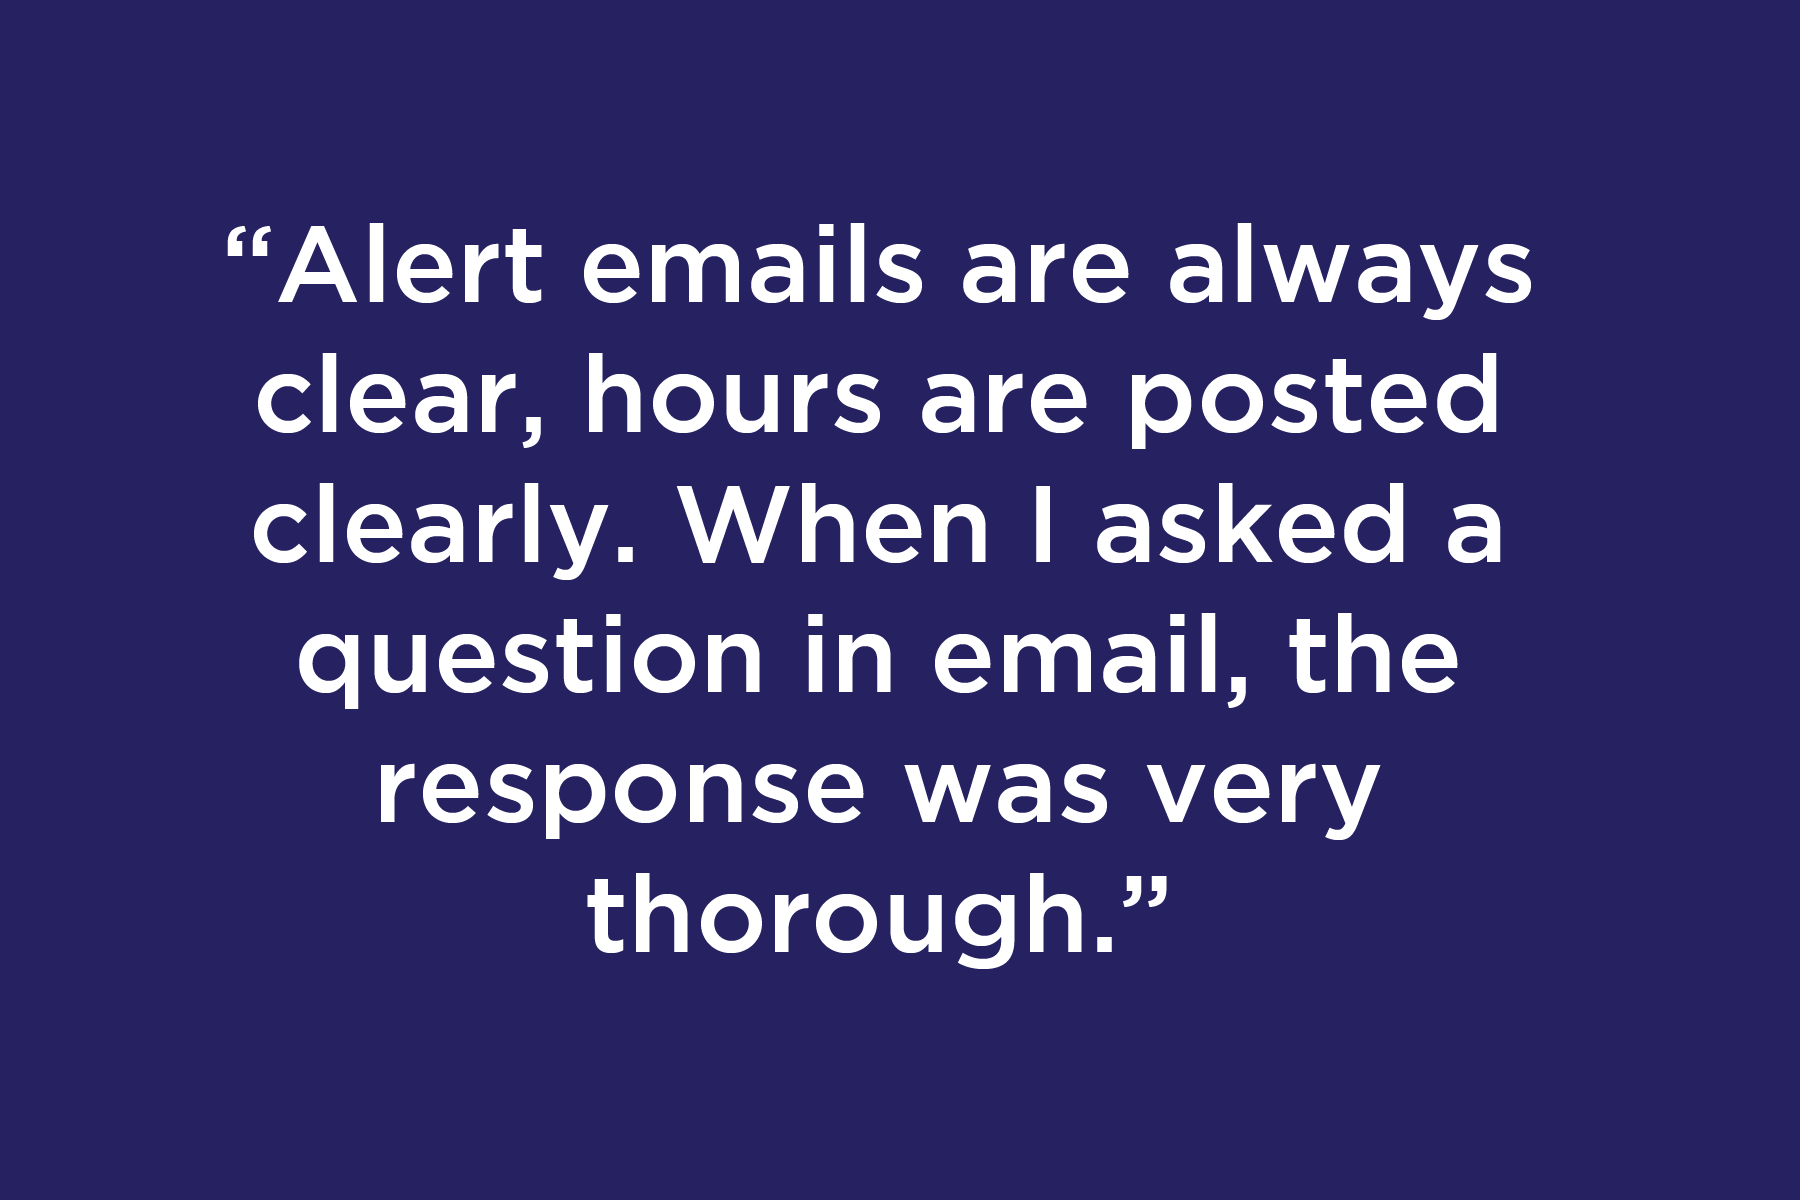 Alert emails are always clear, hours are posted clearly. When I asked a question in email, the response was very thorough.